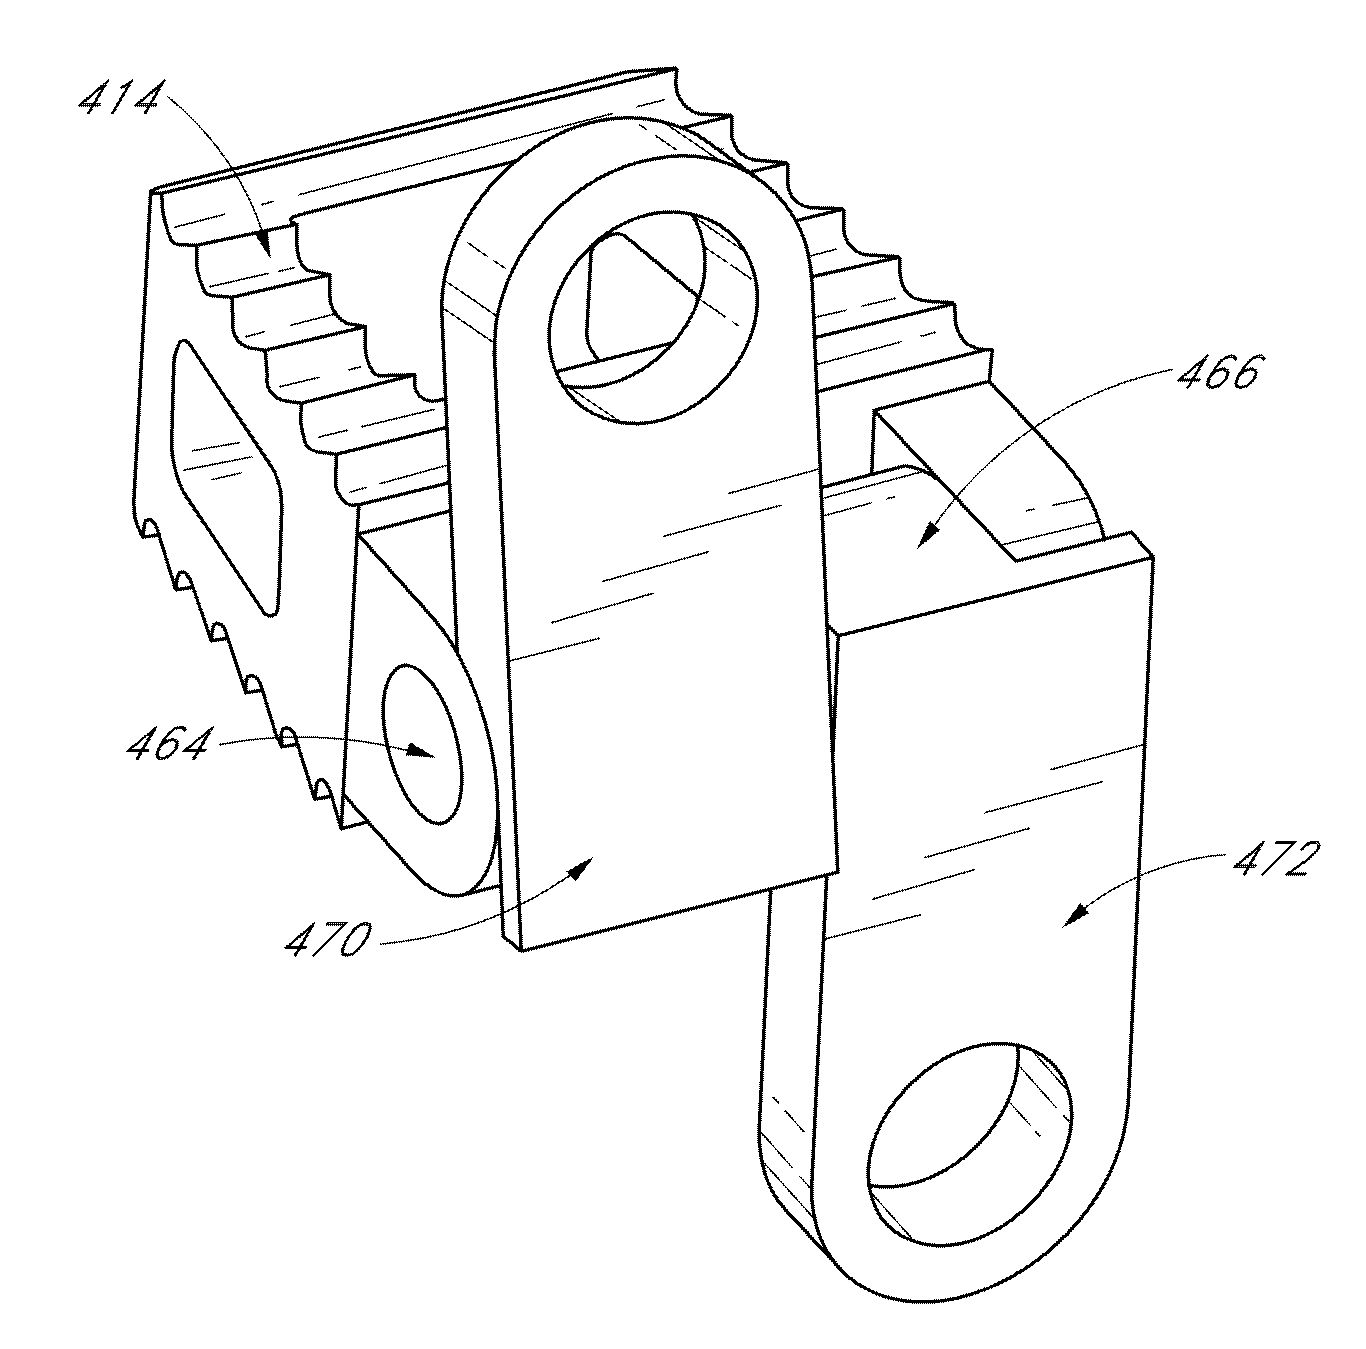 Flanged interbody fusion device